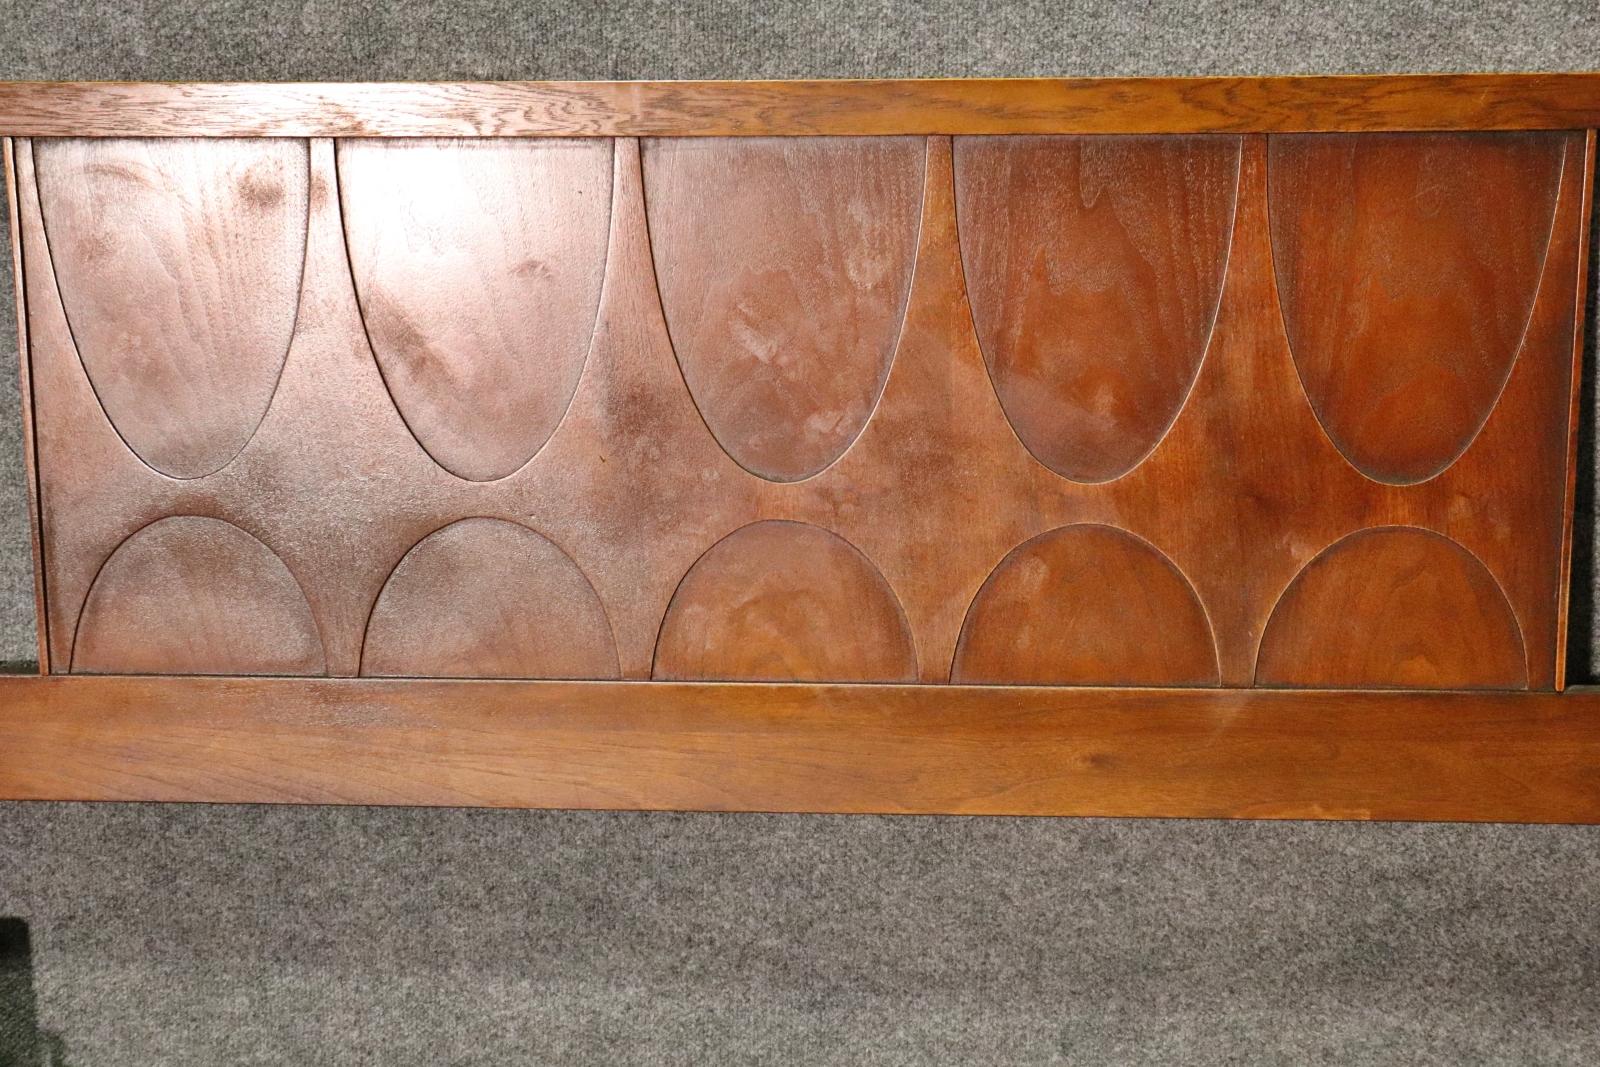 Mid-century modern walnut headboard designed by Broyhill for their 'Brasilia' series. Featuring their iconic 1960s arch design.
Please confirm location NY or NJ